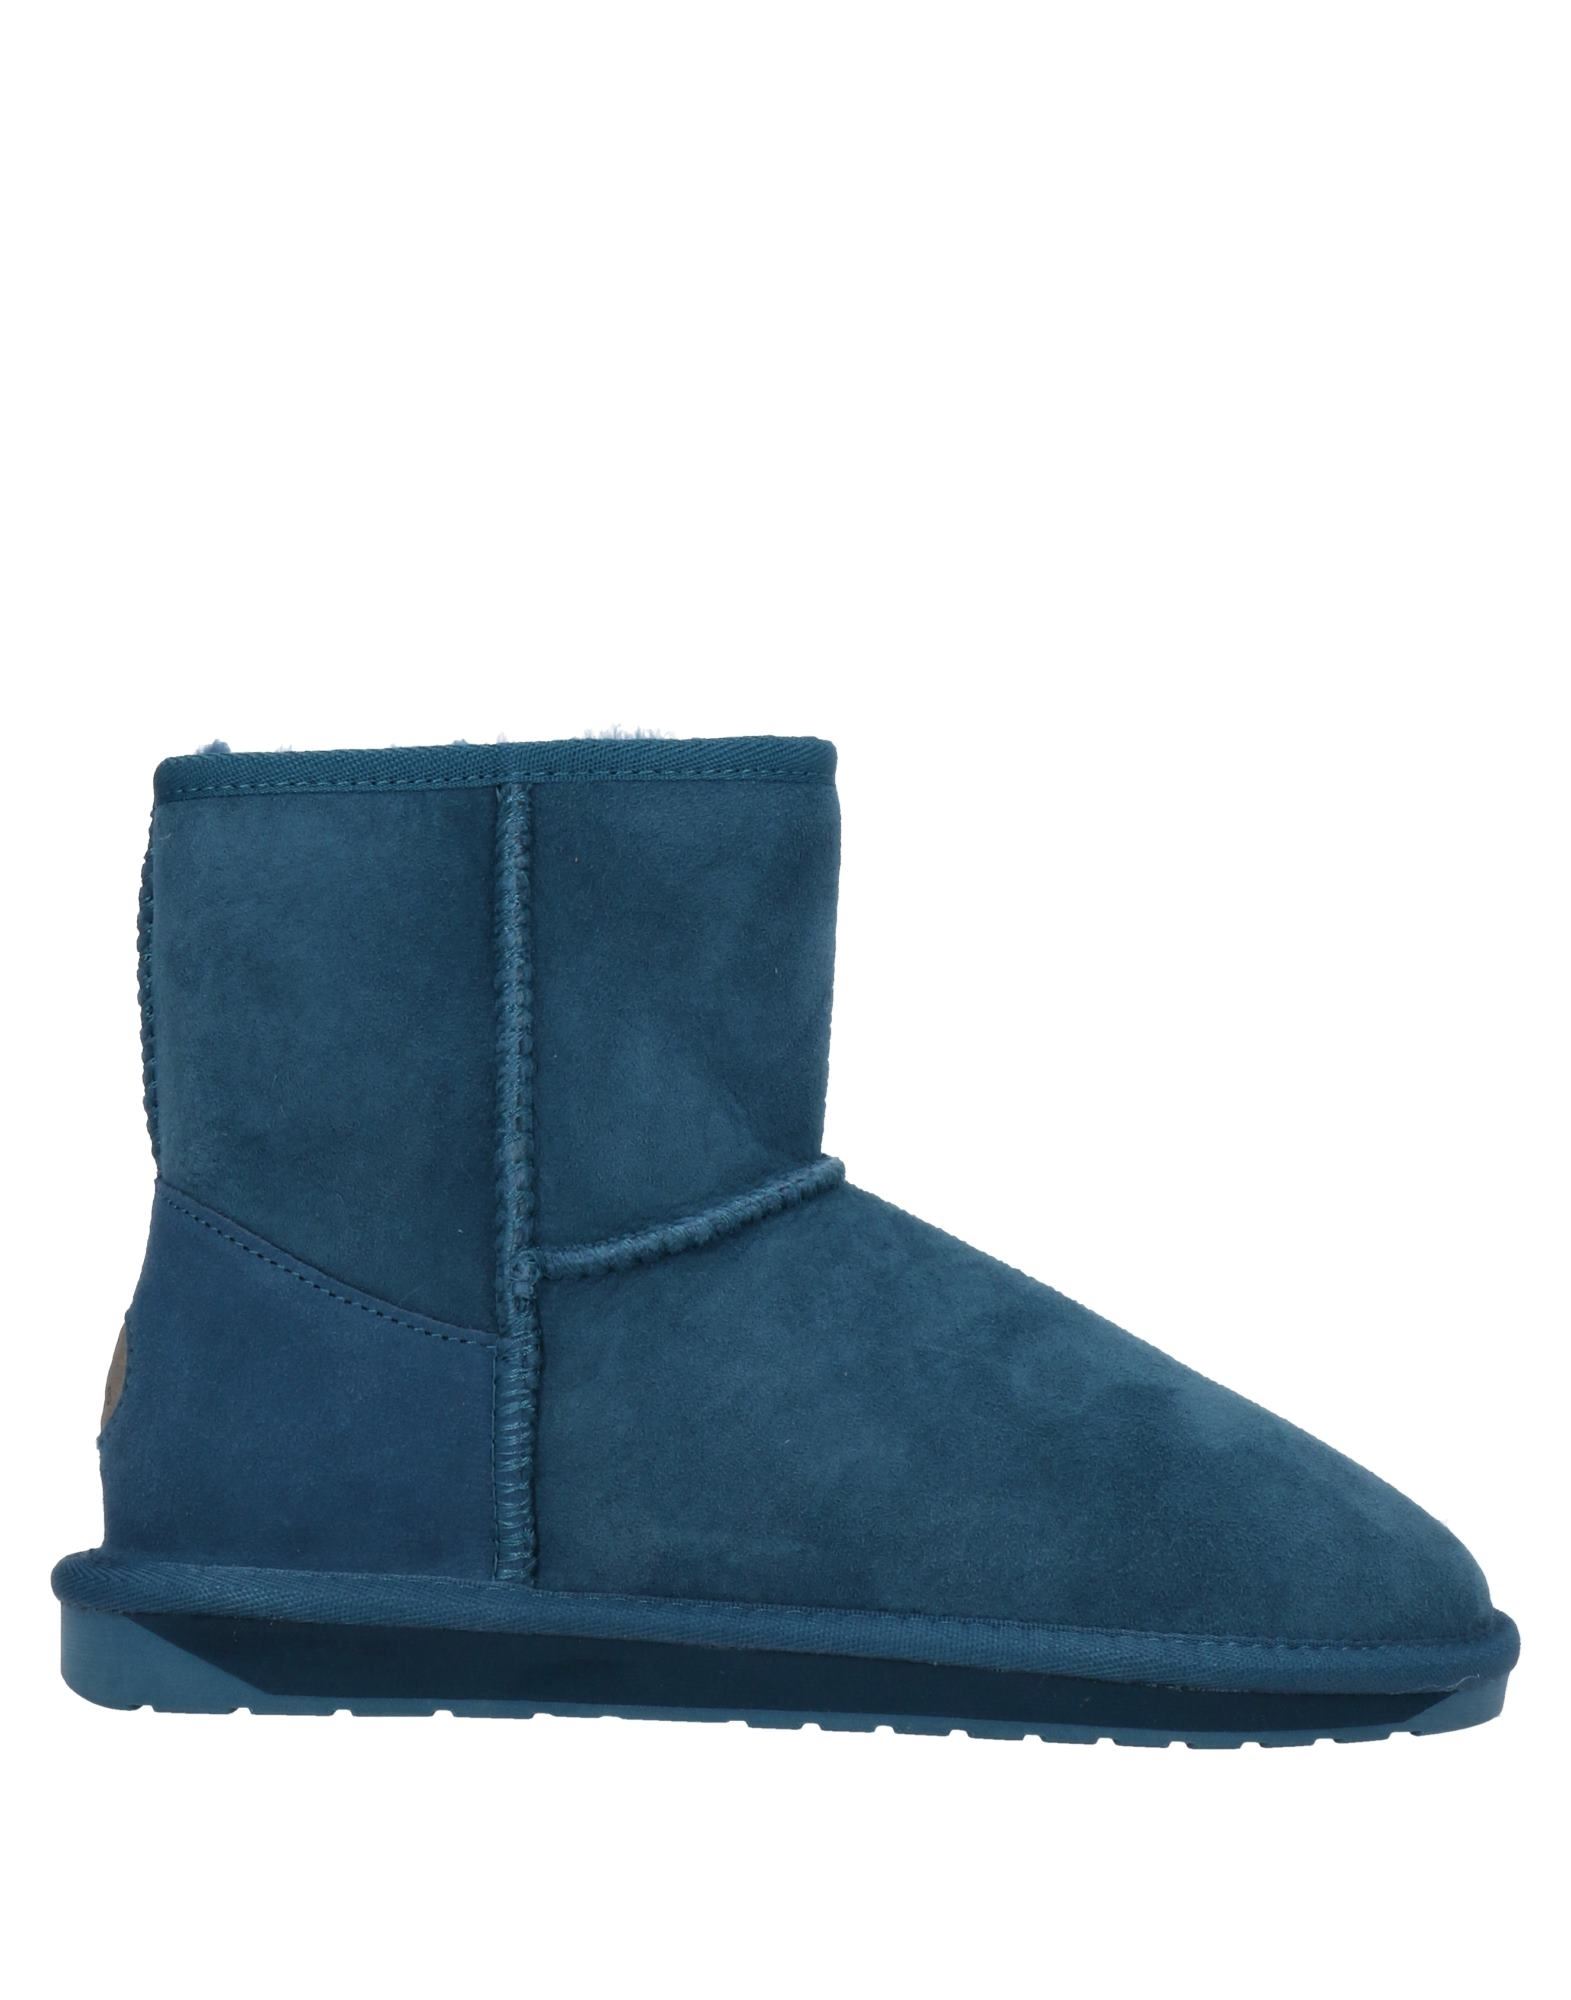 Emu Ankle Boots In Turquoise